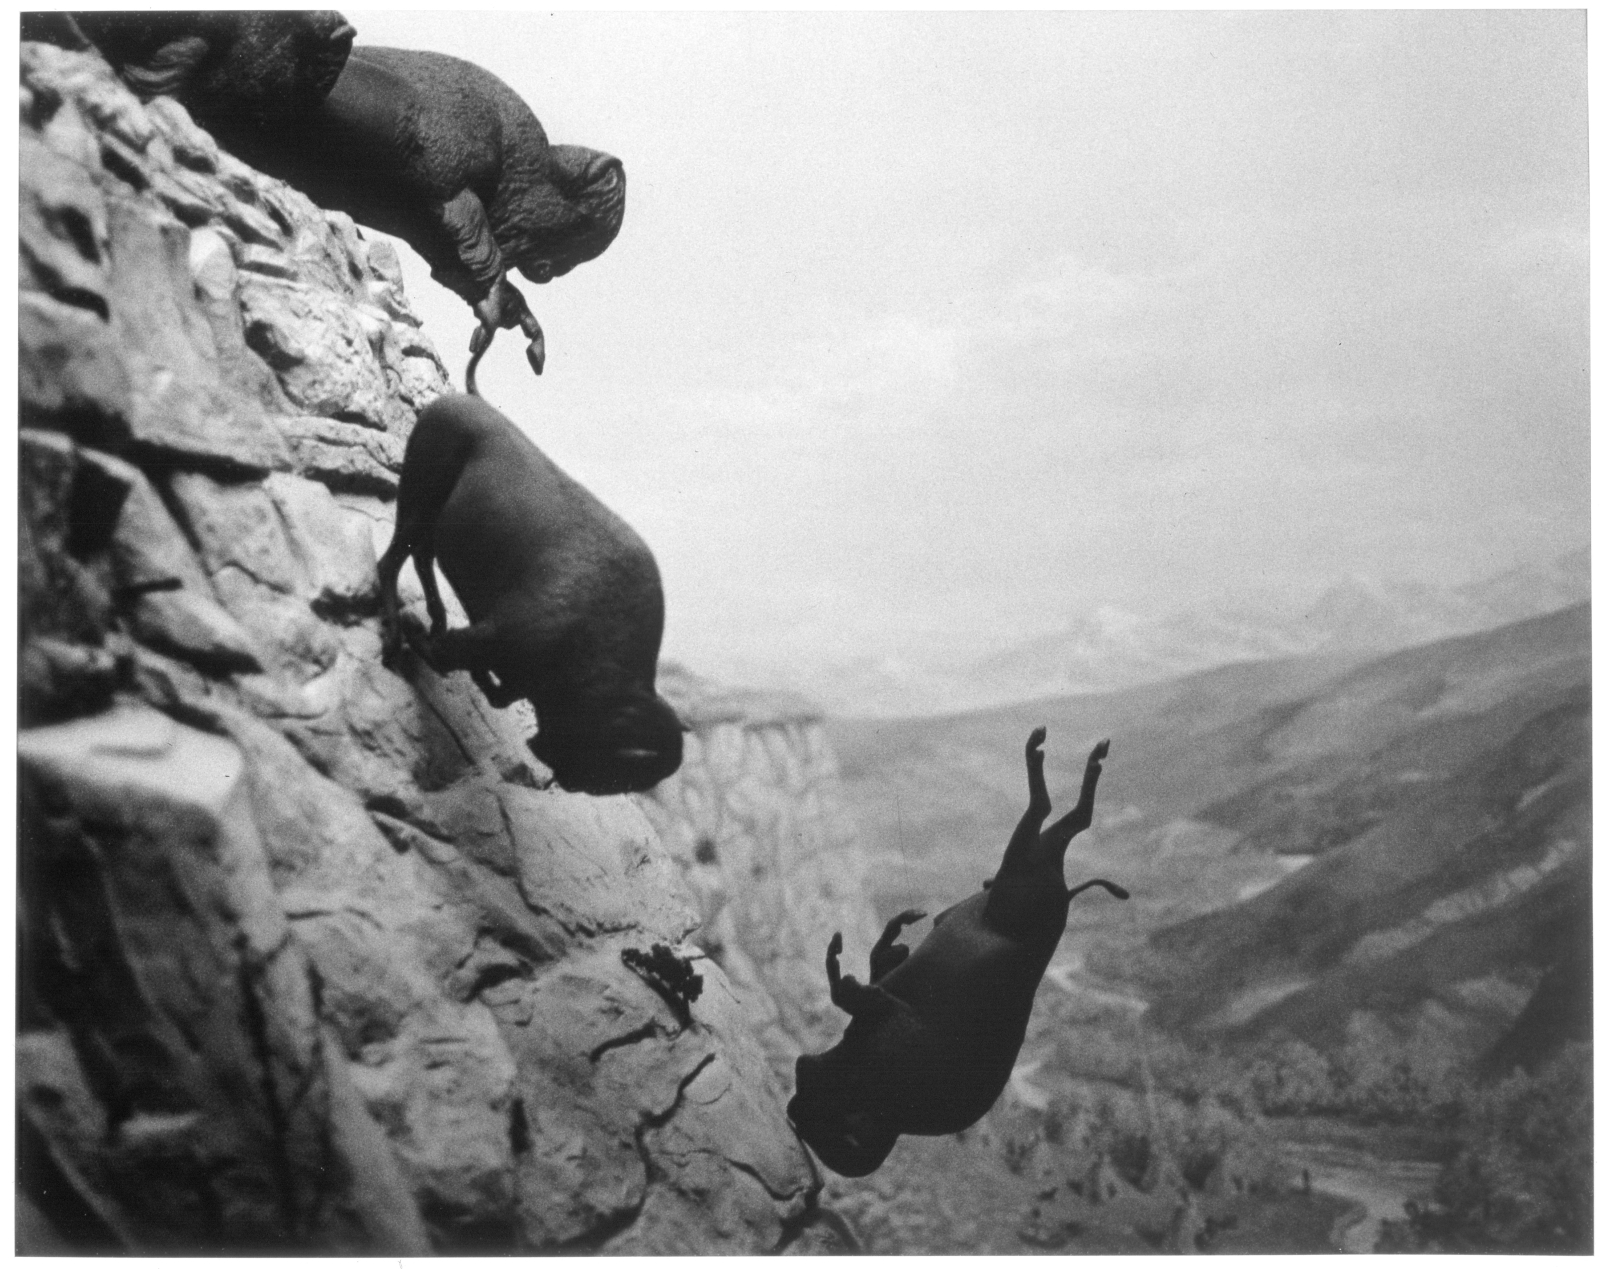 David Wojnarowicz
Untitled (Buffalos), 1988-89
signed and numbered on front
gelatin silver print
40 1/2 x 48 ins.
102.9 x 121.9 cm